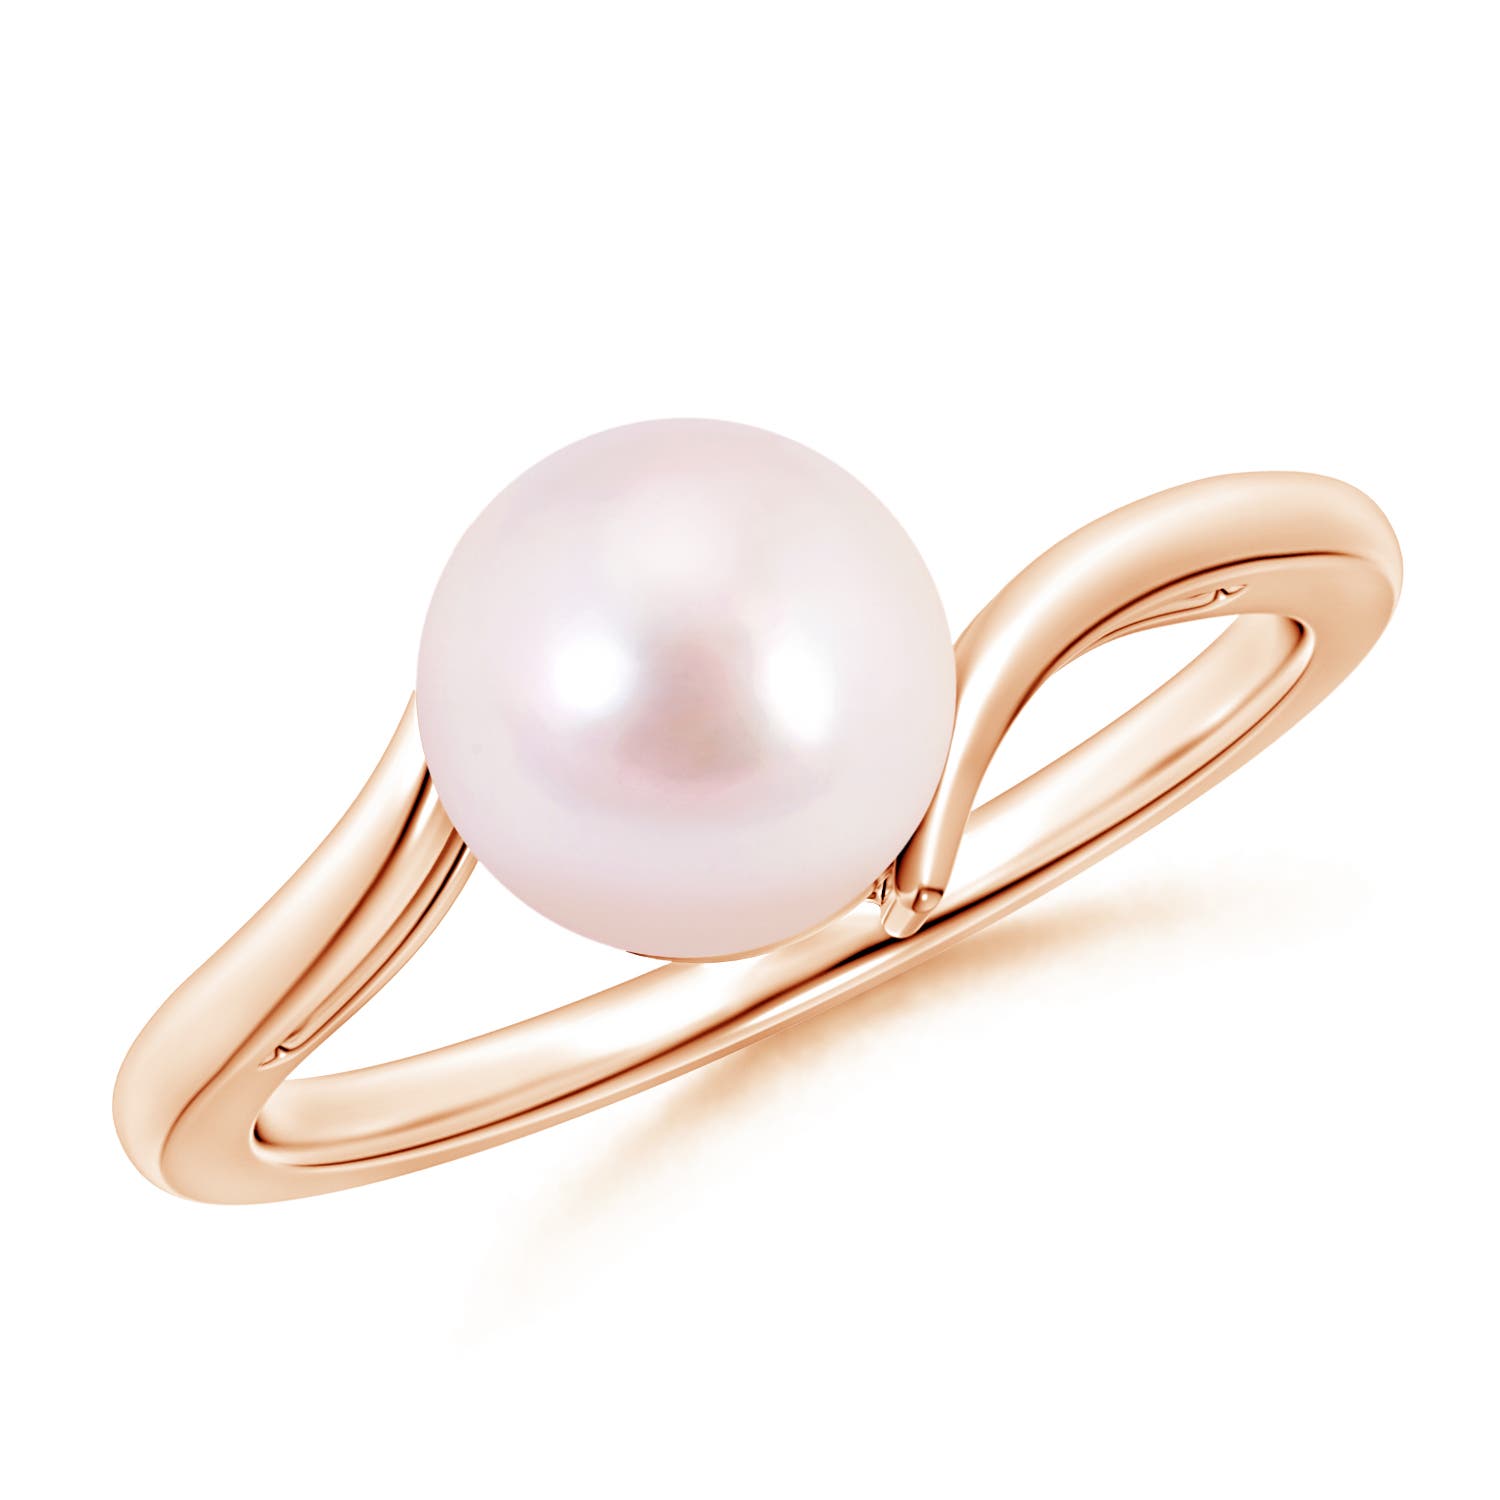 3 layer Akoya Pearl Ring with an Adjustable Chain